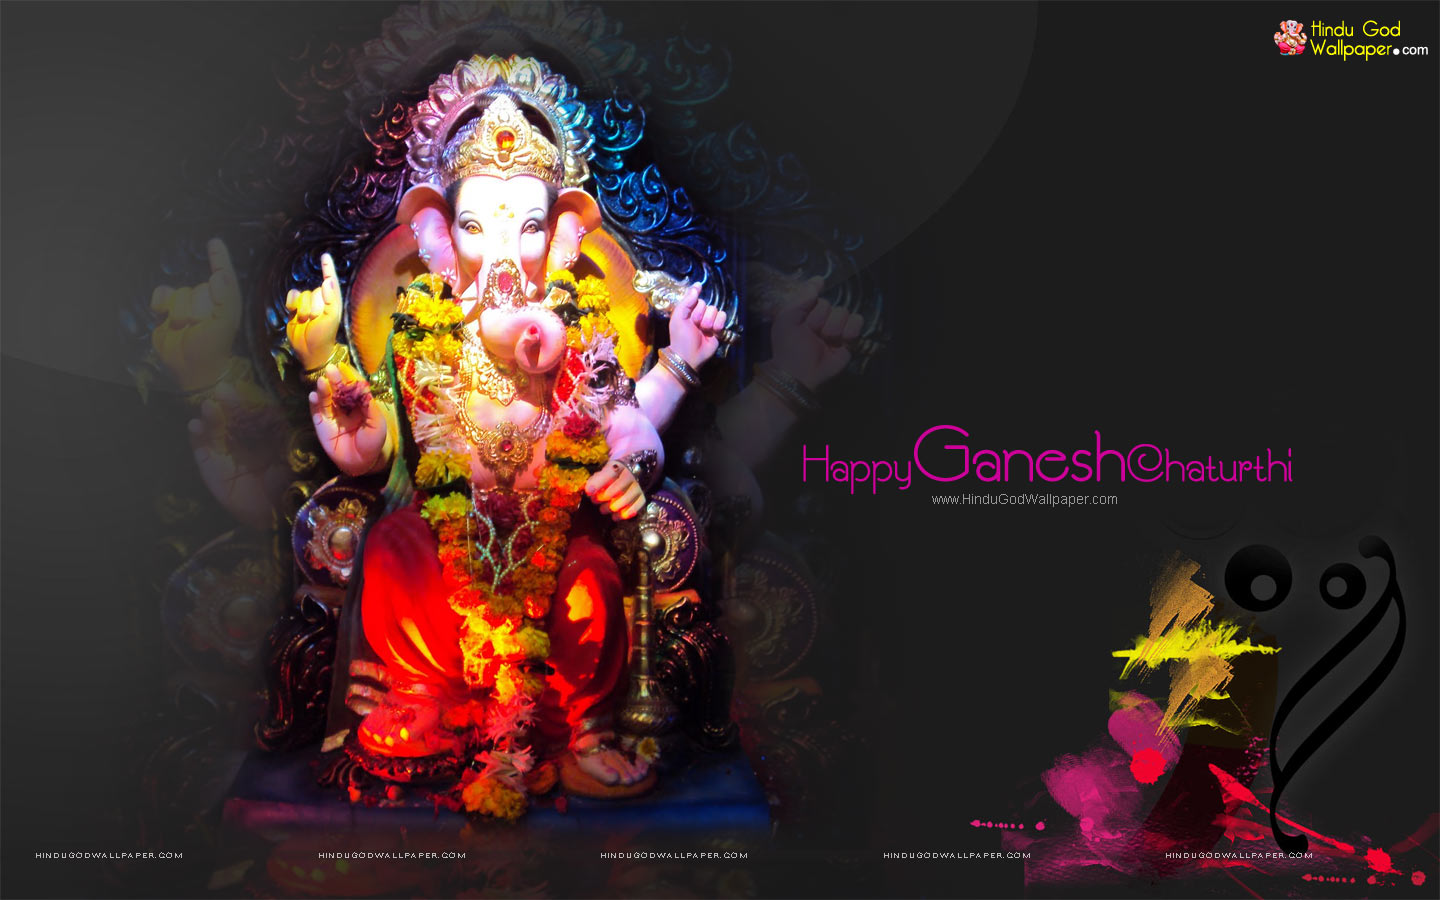 Ganesh chaturthi wallpapers with wishes download